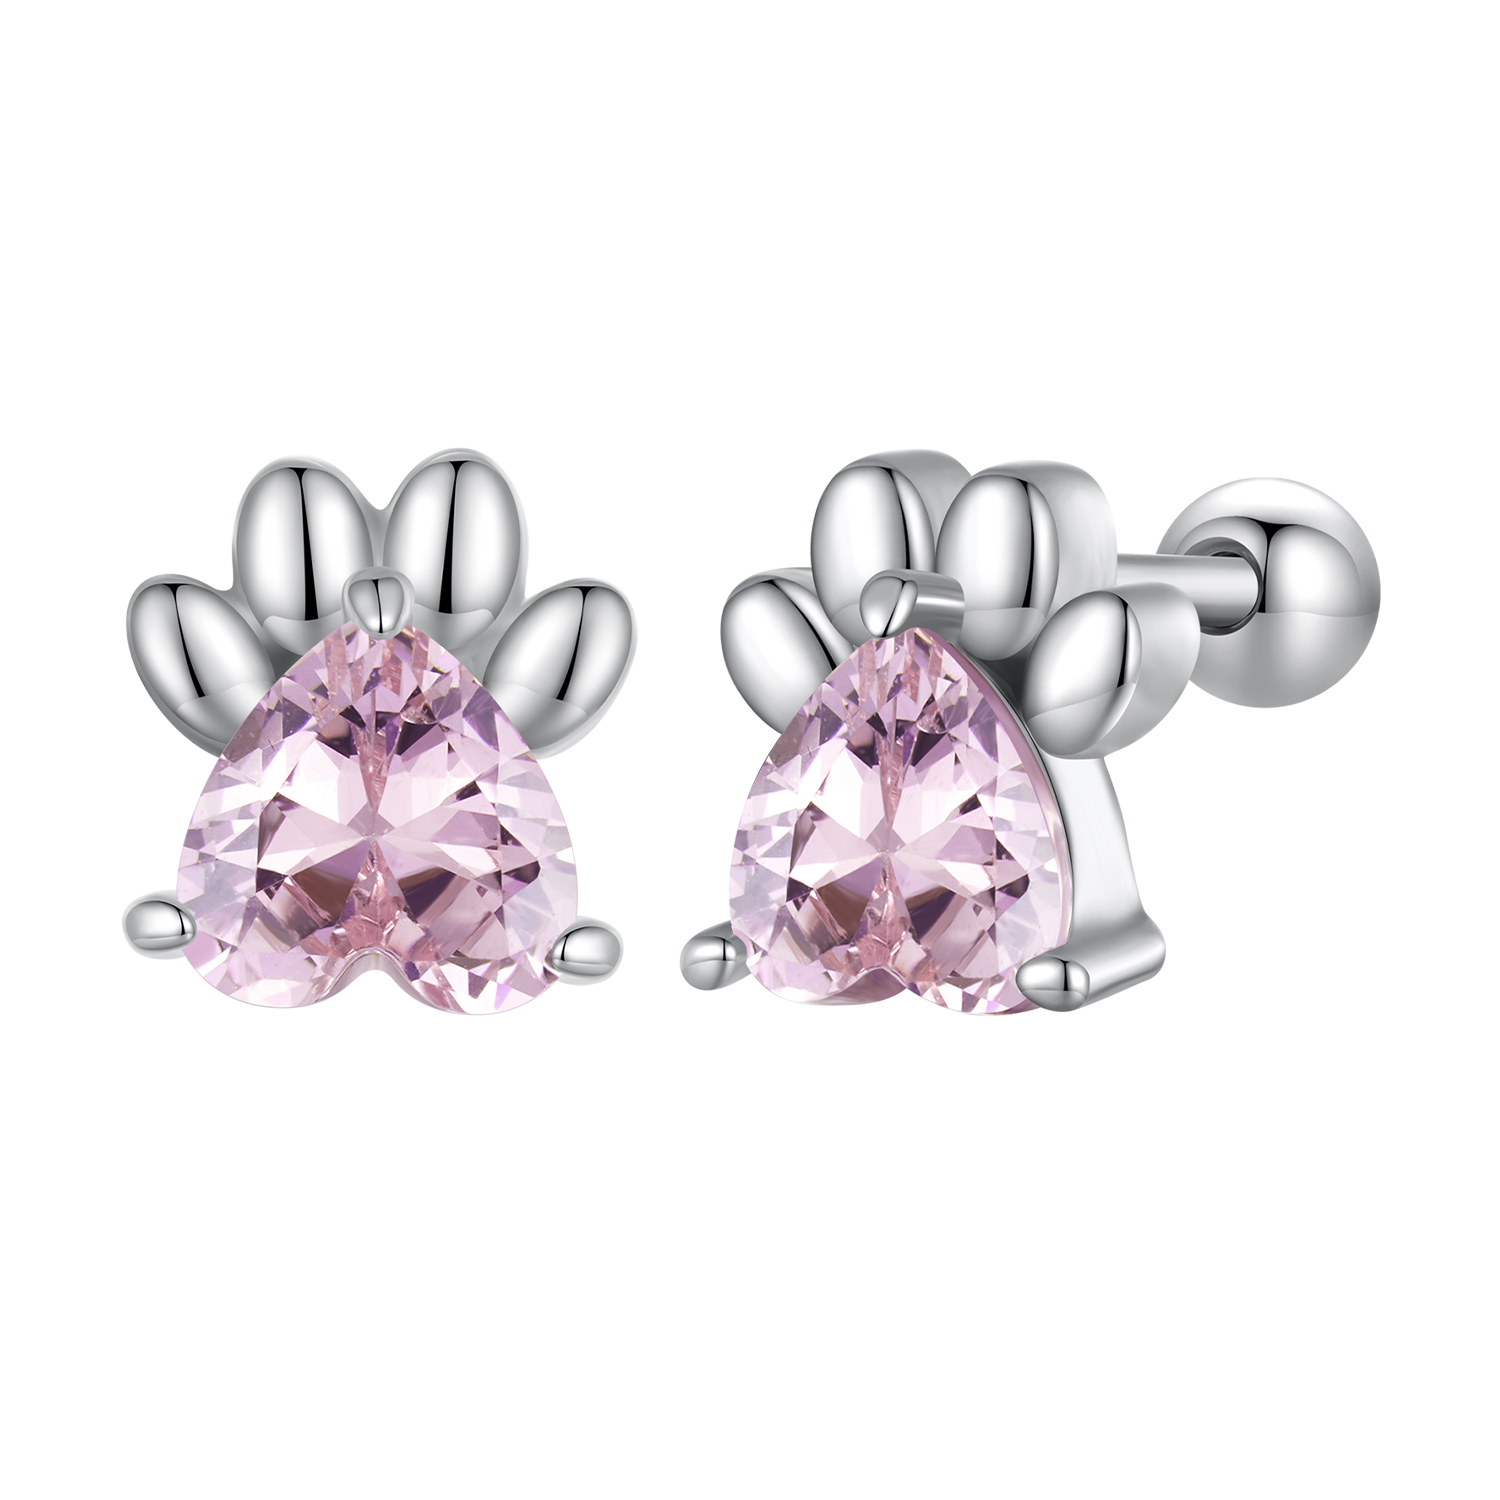 pandora style earrings adorned with adorable pink dog paw studs sce1574